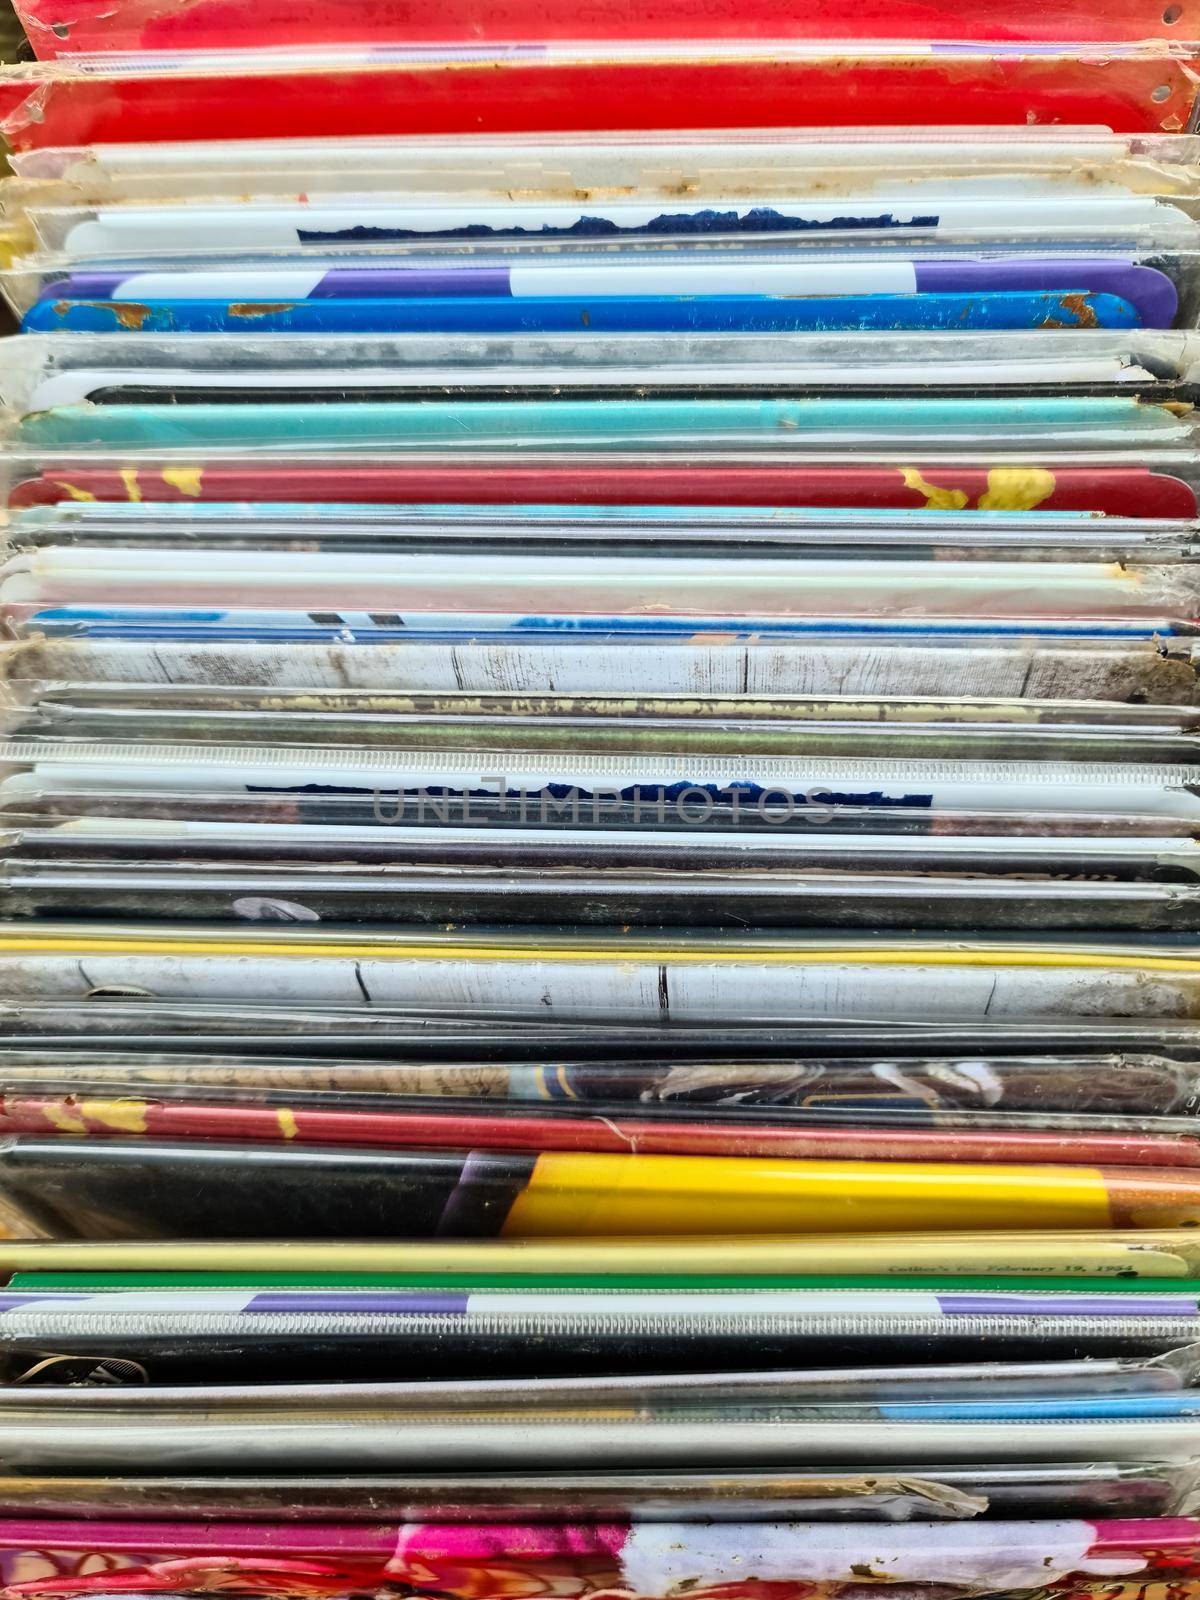 Numerous vintage signs and vinyl records in a box seen from above